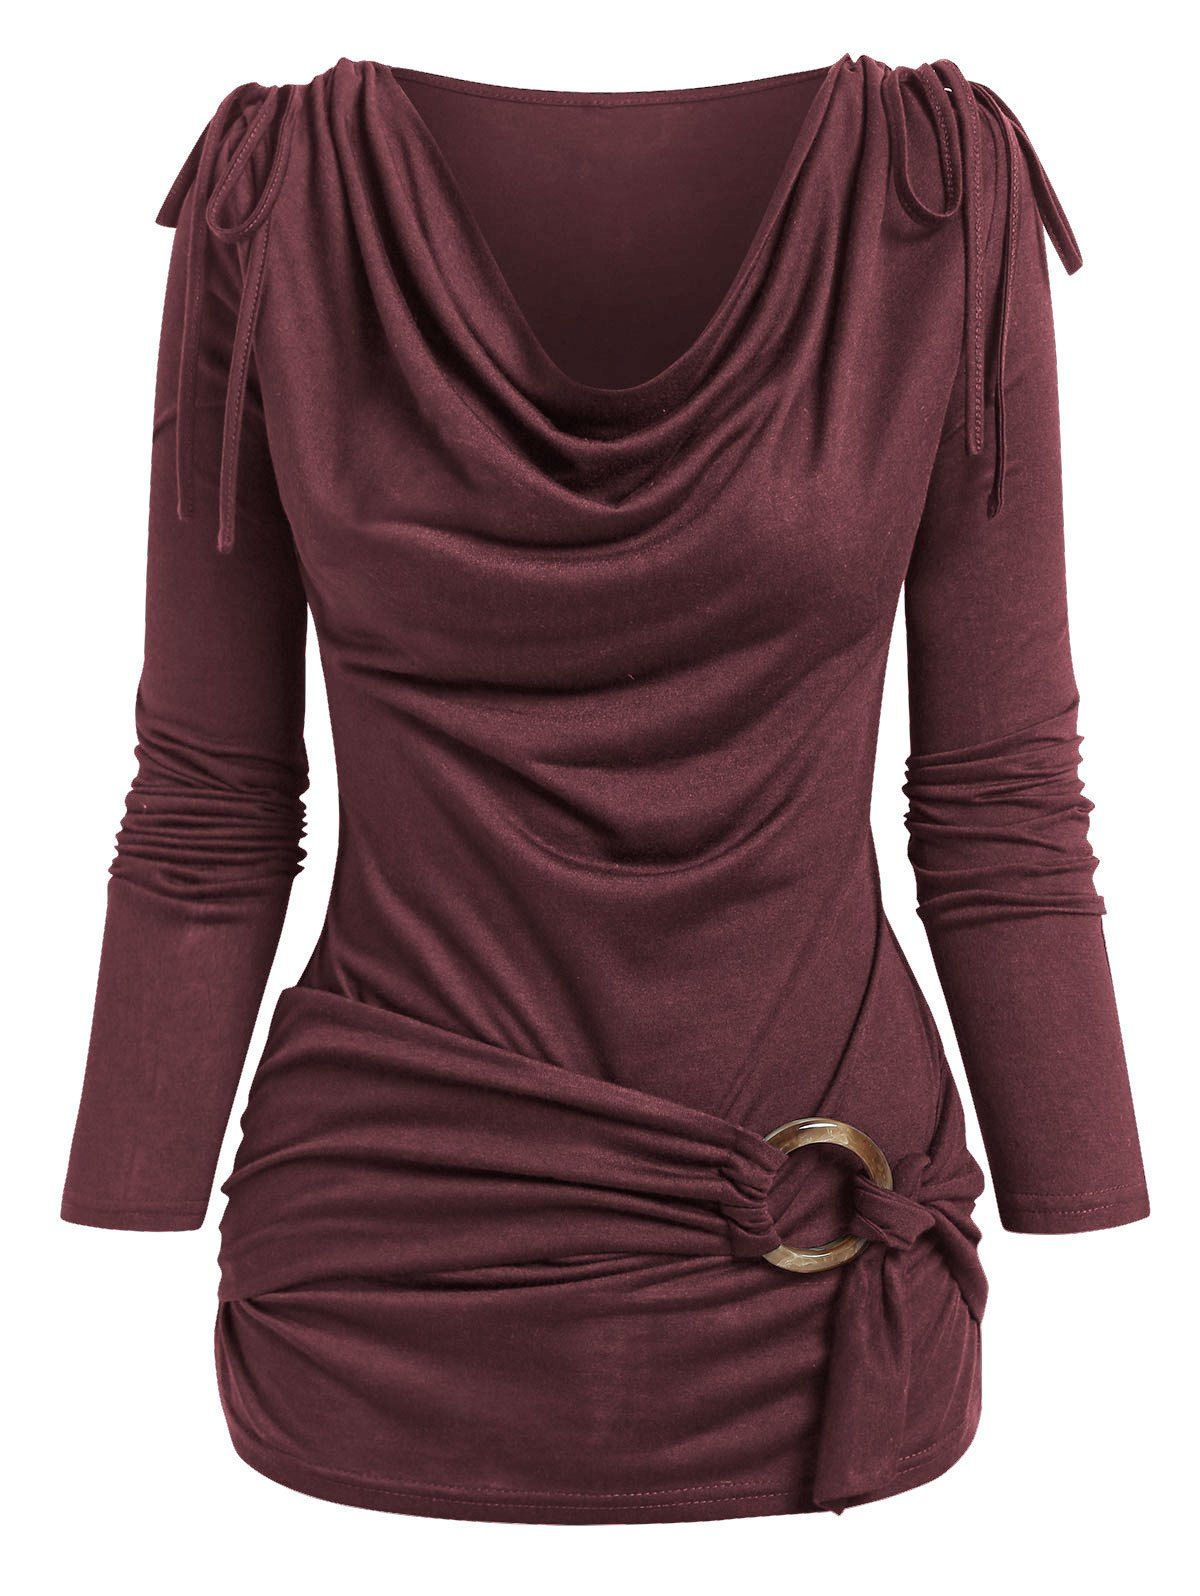 Plain Cinched Cowl Neck Draped Long Sleeves O Ring T Shirt - DEEP RED M